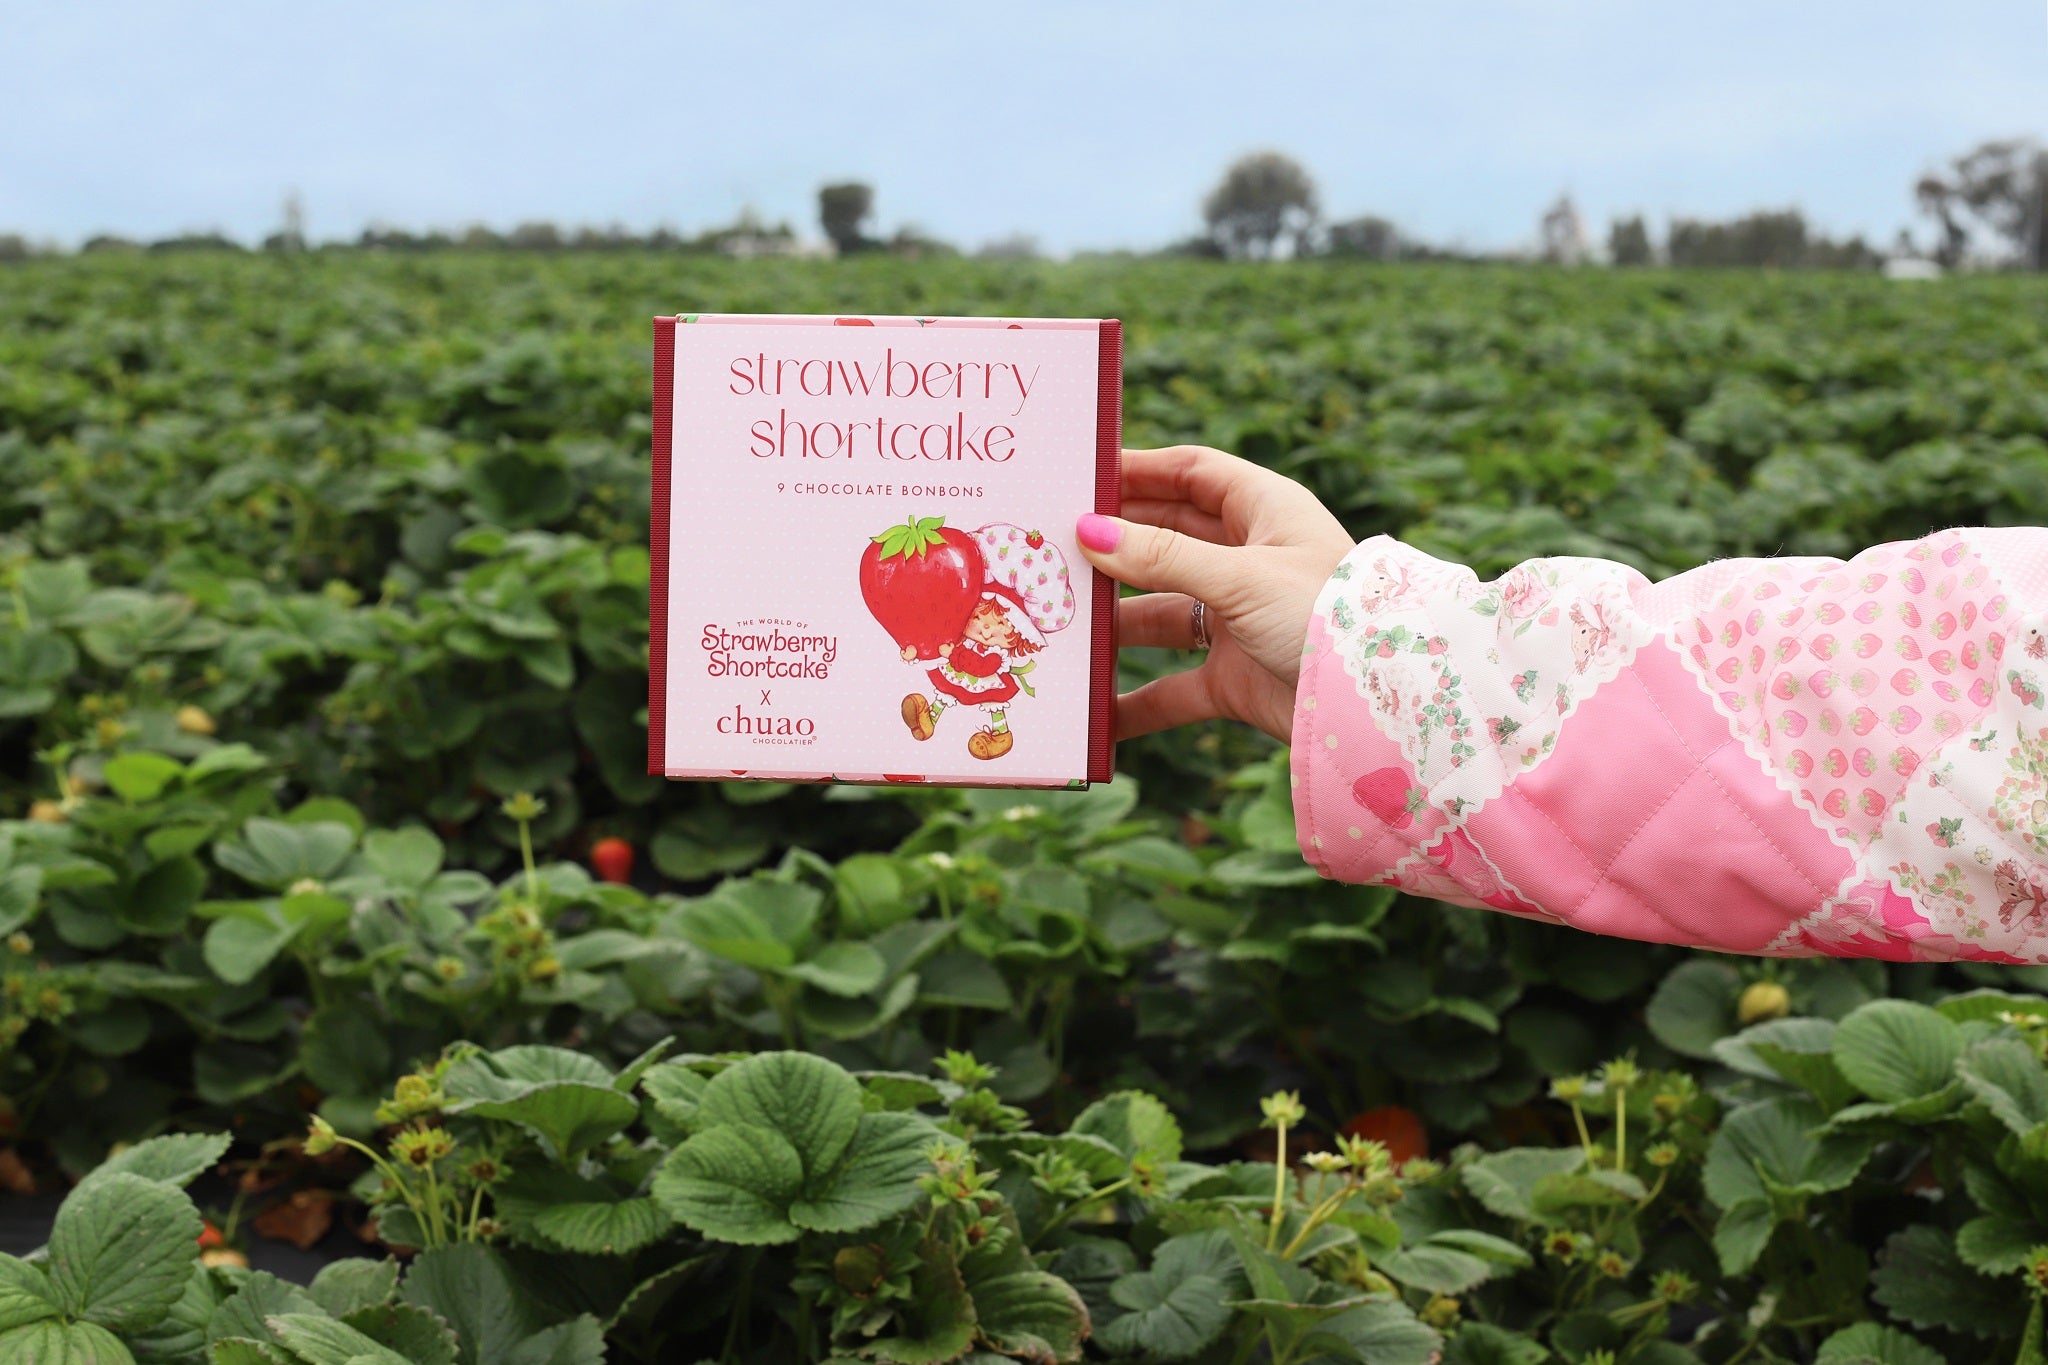 An arm holding a box of chuao and strawberry shortcake bonbons in a strawberry field